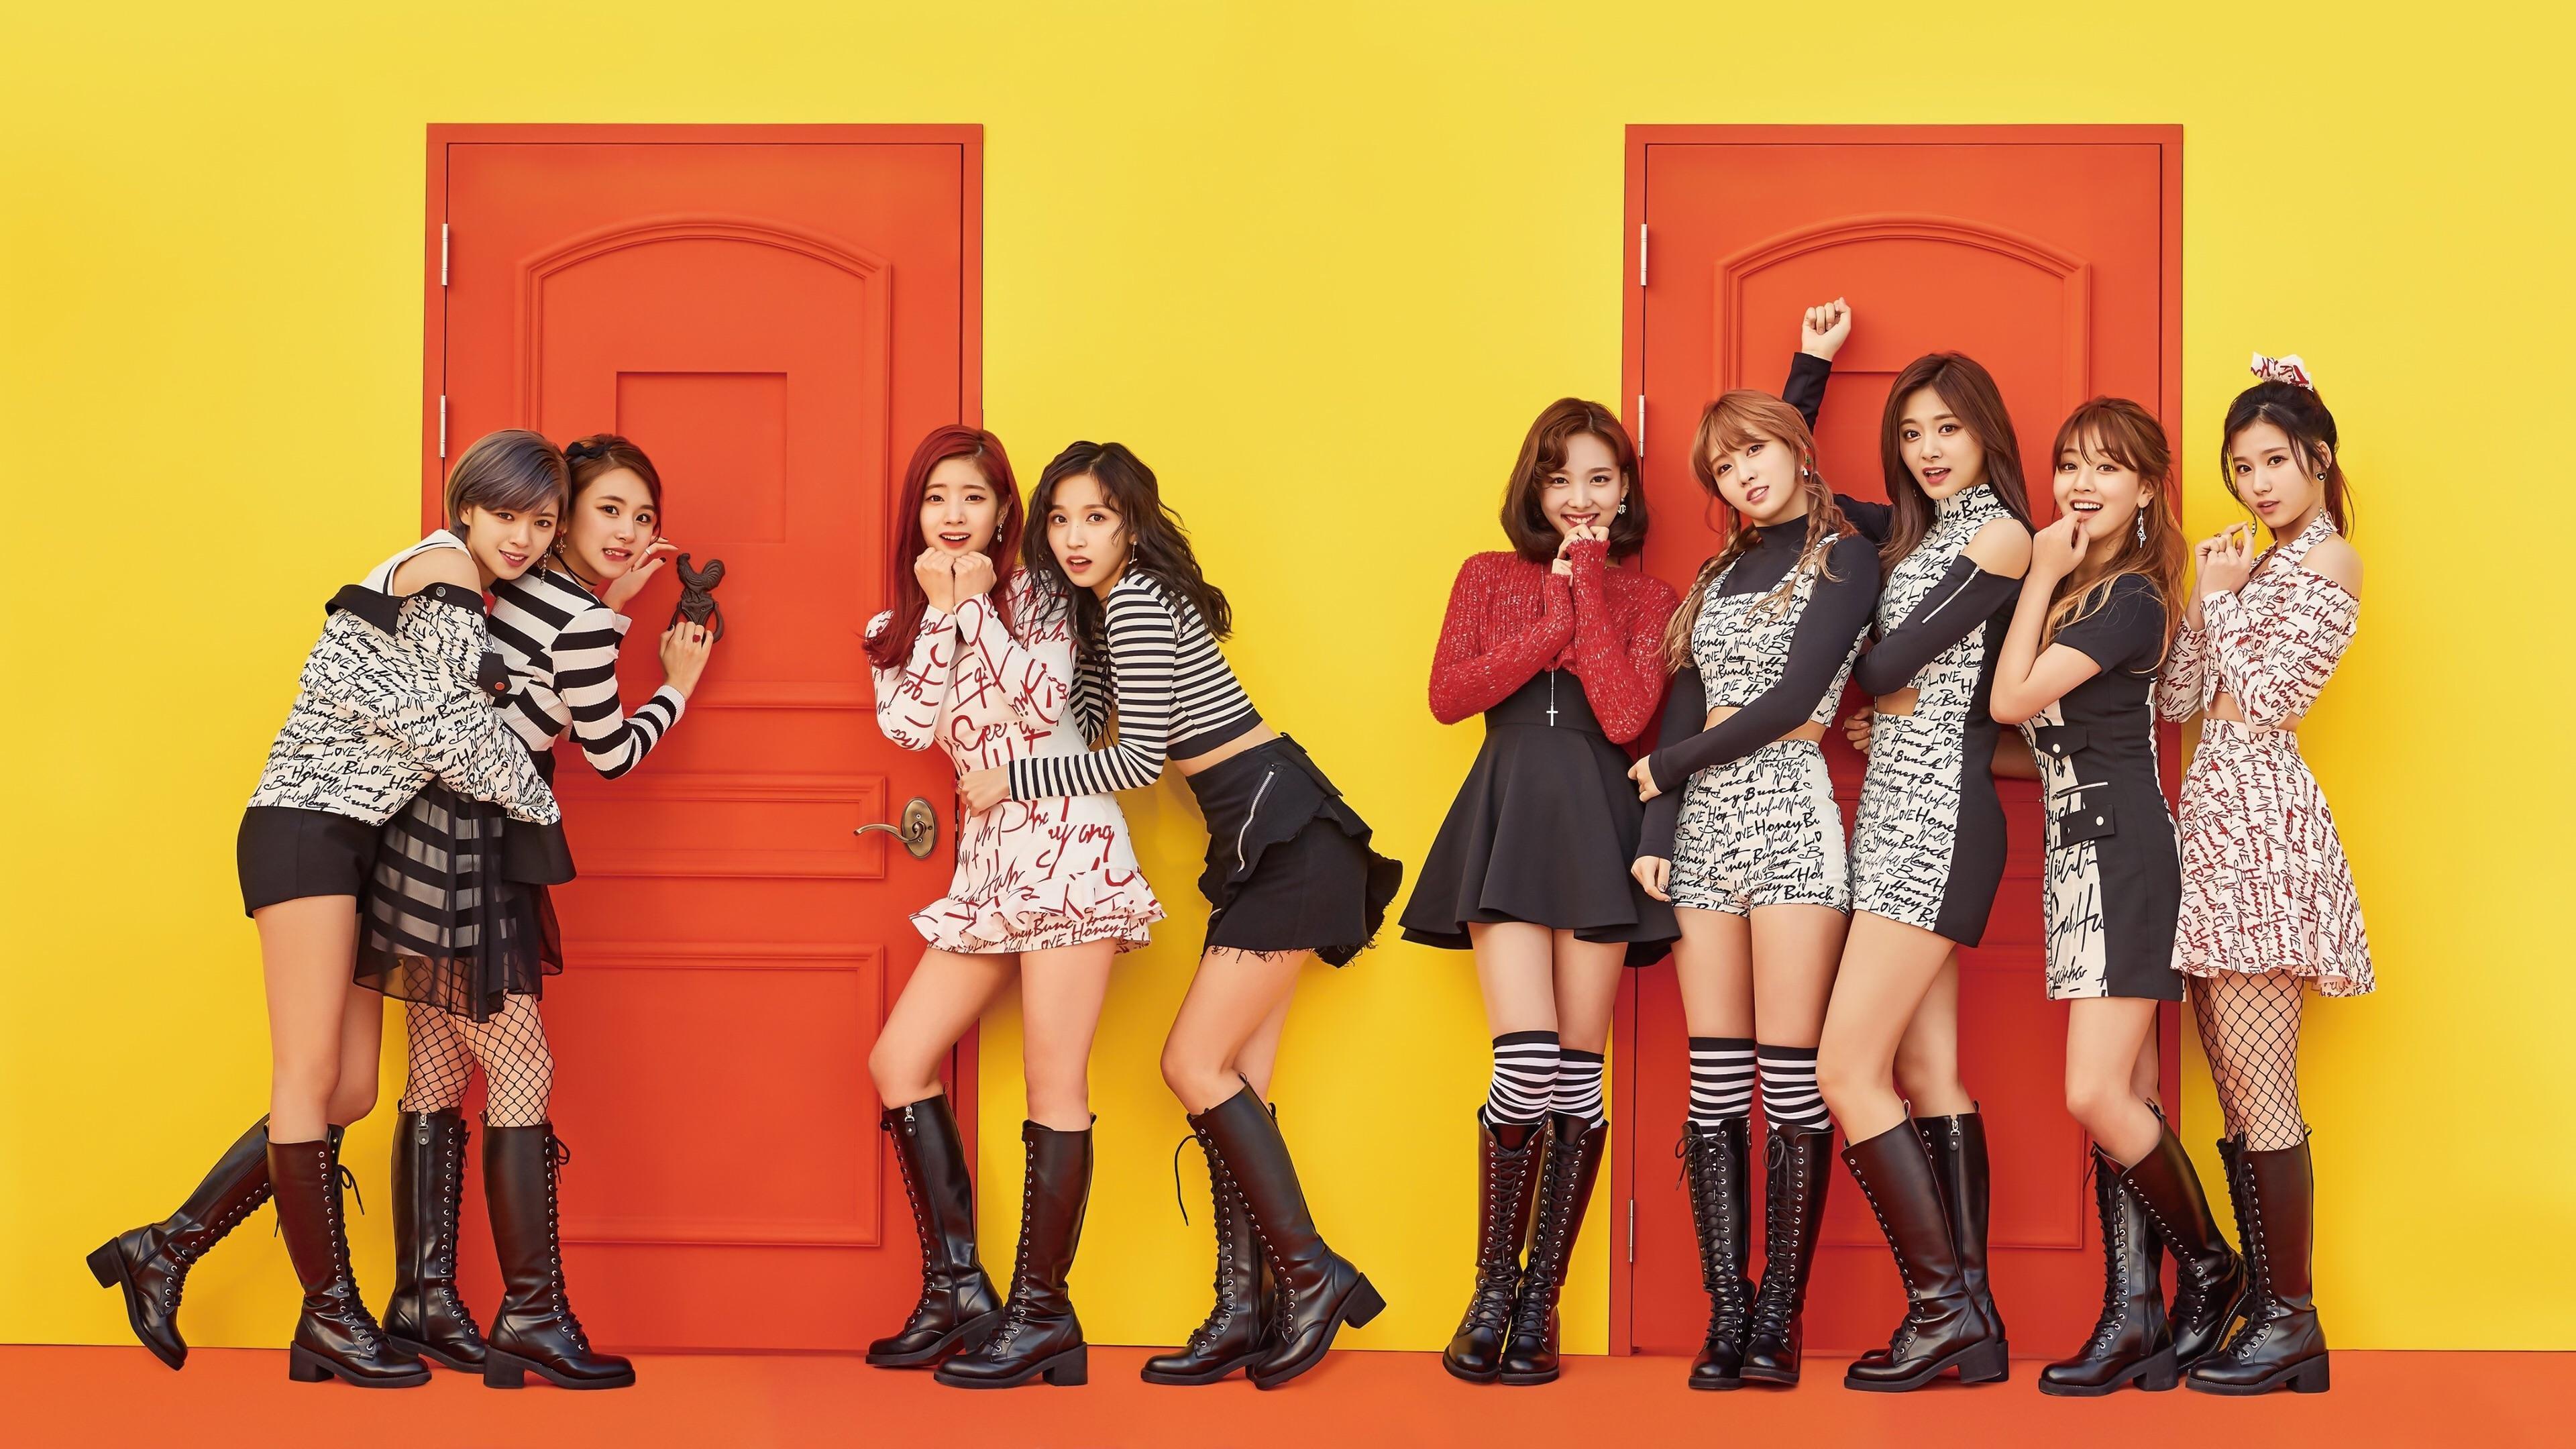 Twice 4K wallpaper for your desktop or mobile screen free and easy to download